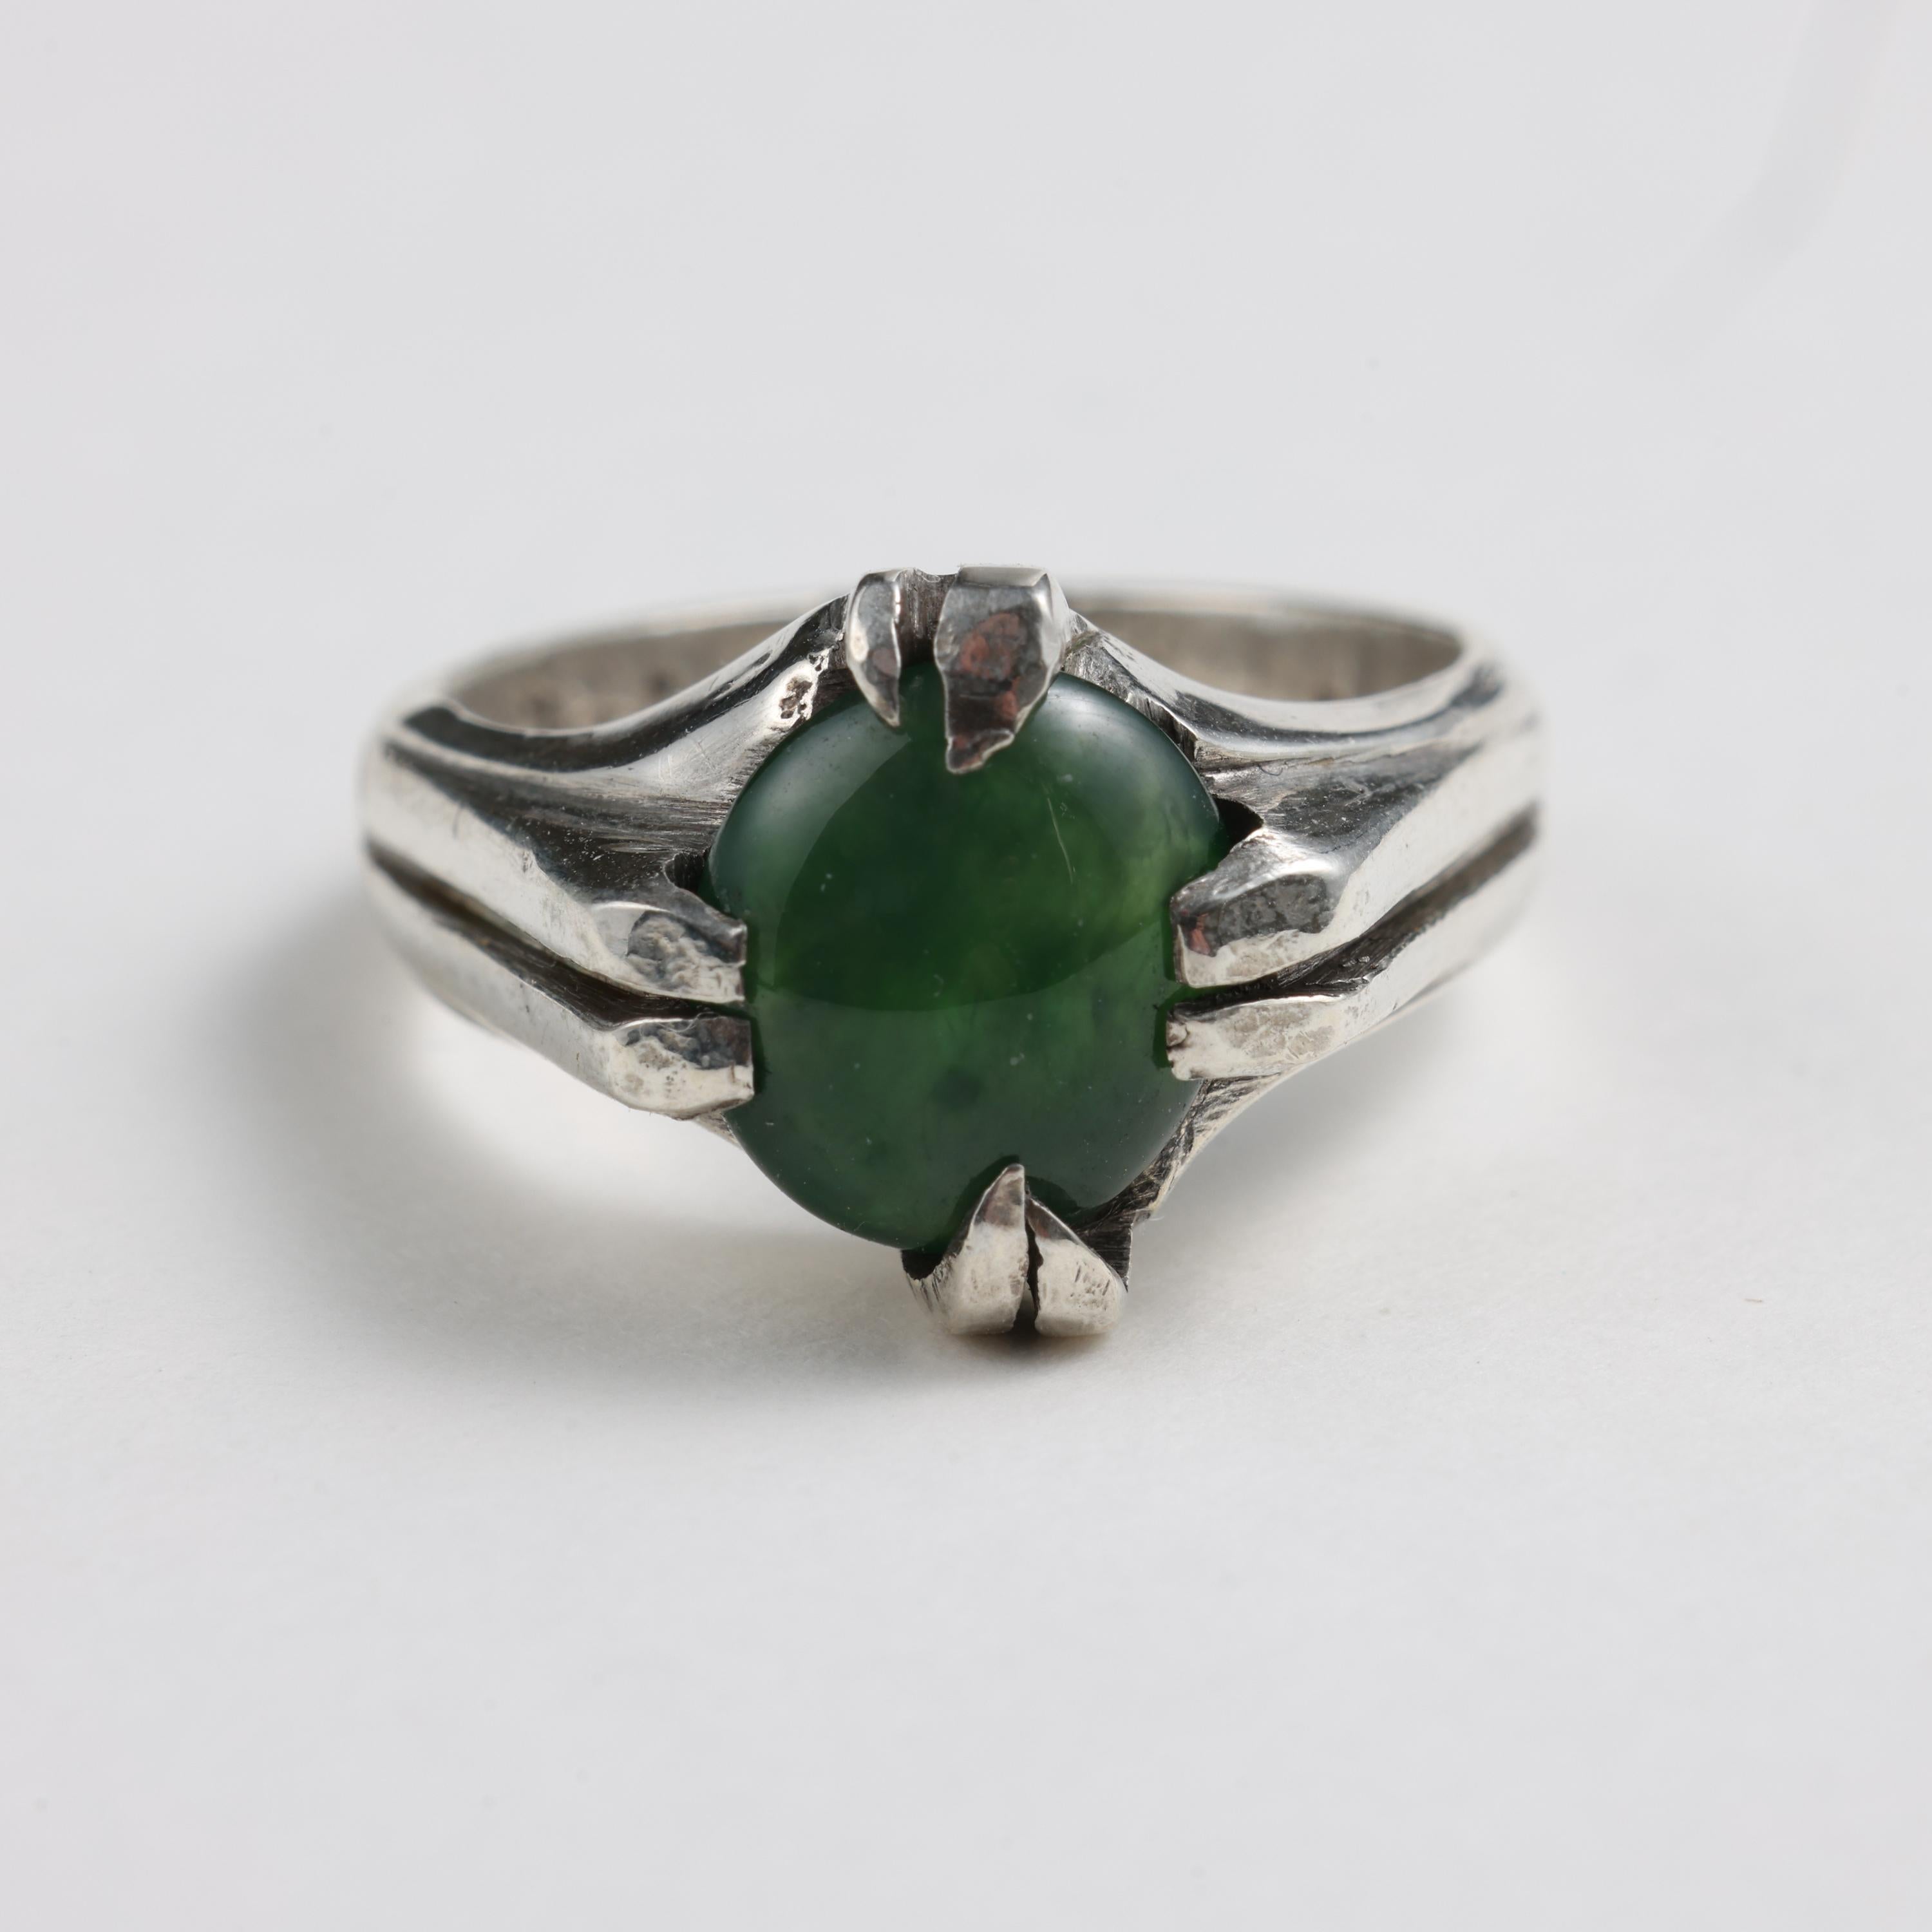 This gorgeous size 6 ring was handmade from silver and is constructed to apocalypse-survival standards. The forest-green omphacite jade compliments the rustic, heavy patina of the silver with its high-gloss polish.

The silver mounting is somewhat